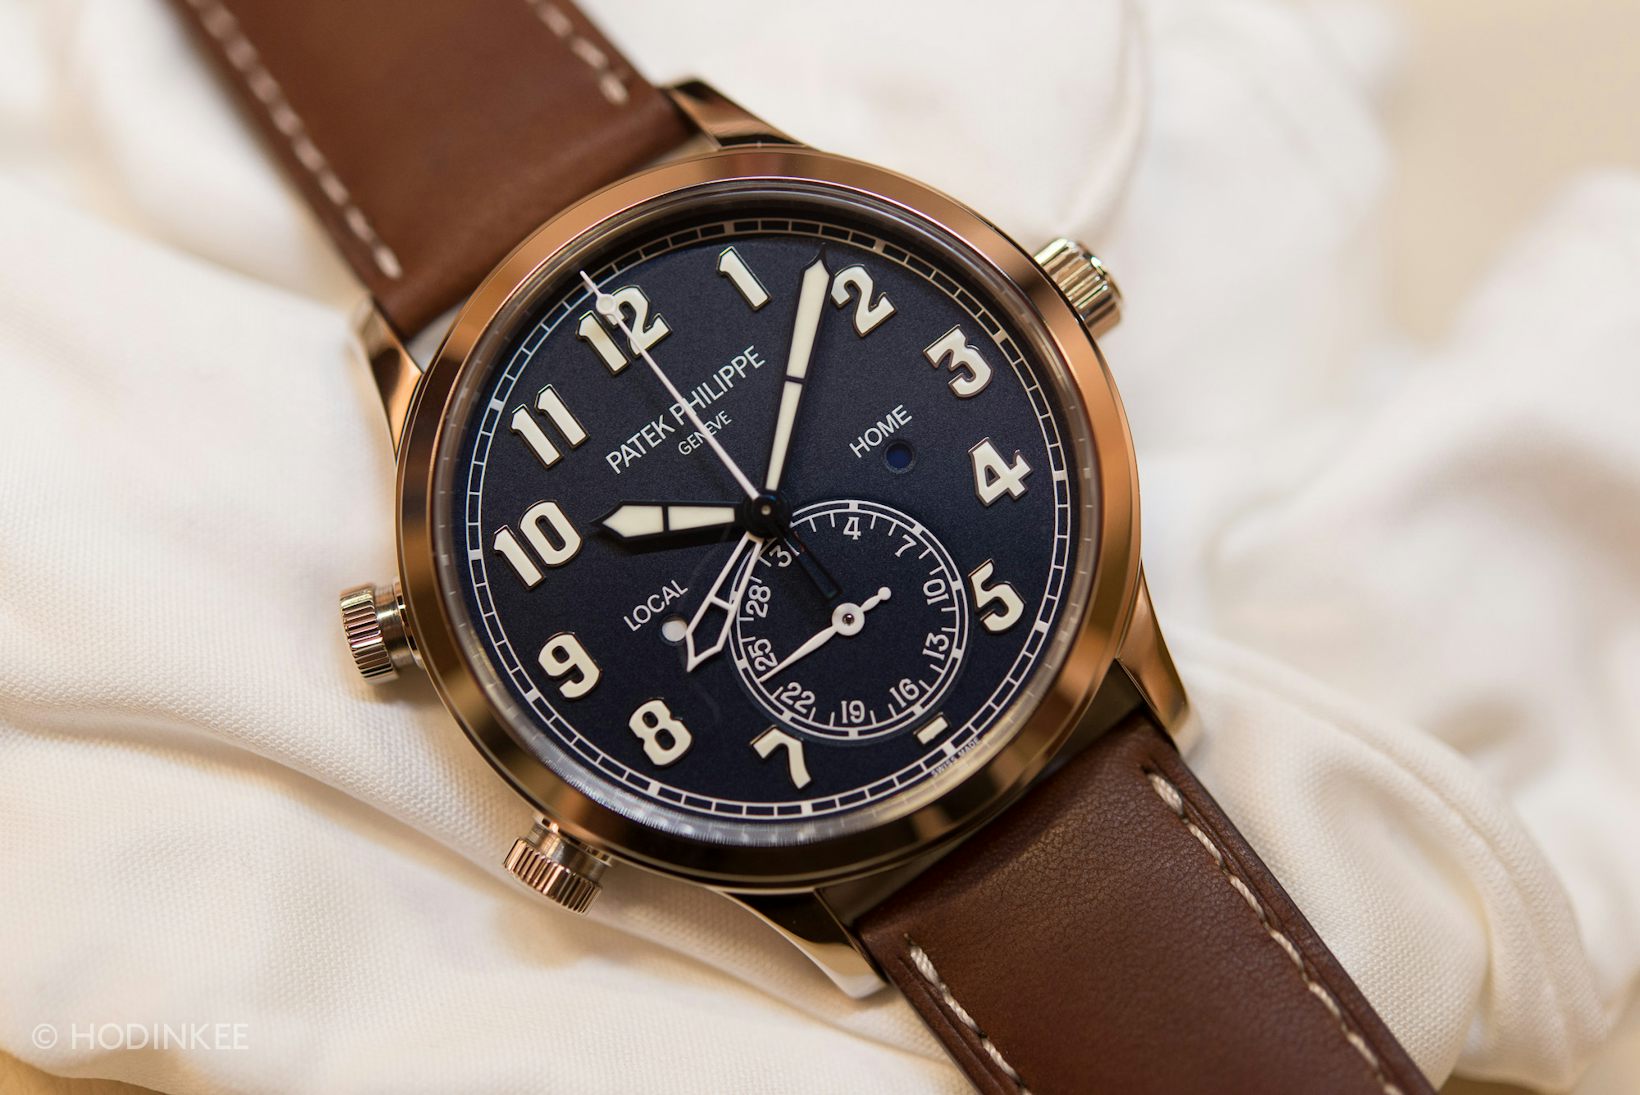 Family, Business, and Legacy, the Grand Conversation with Patek's